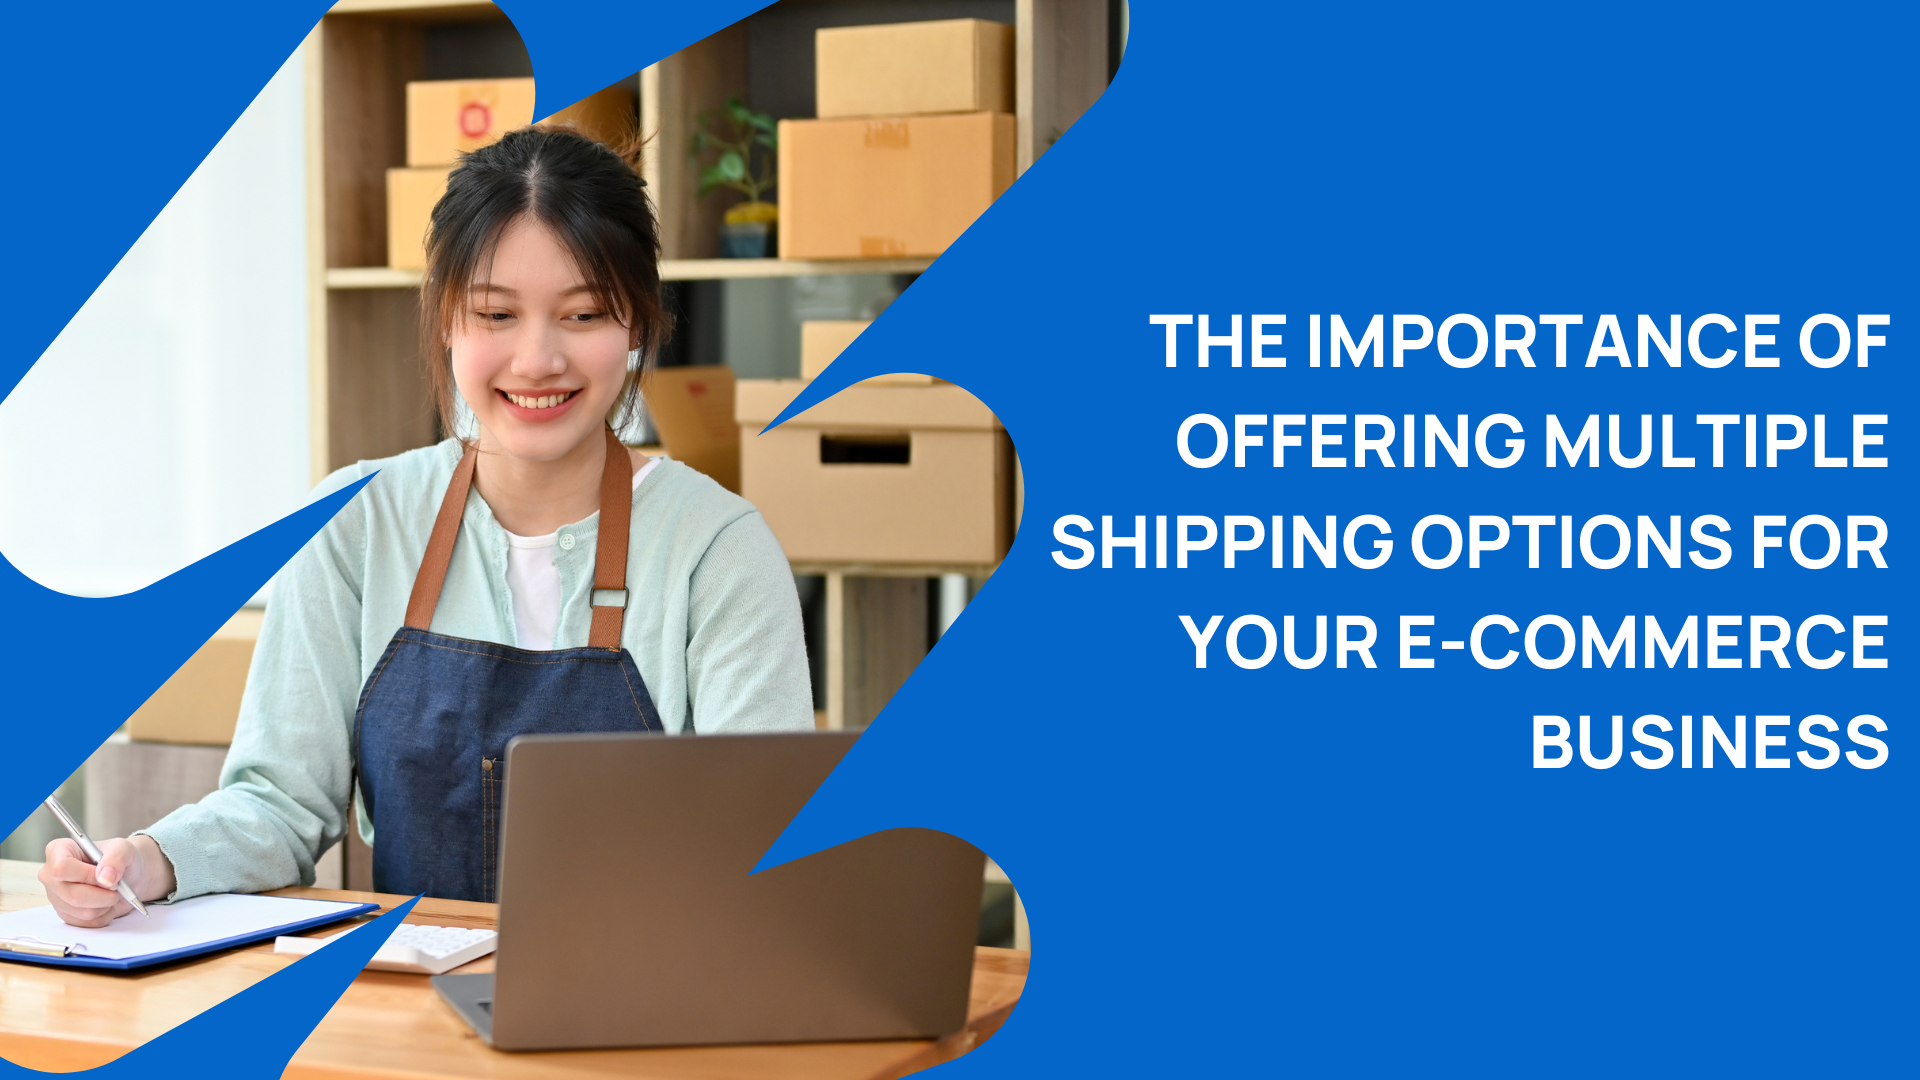 THE IMPORTANCE OF OFFERING MULTIPLE SHIPPING OPTIONS FOR YOUR E-COMMERCE BUSINESS